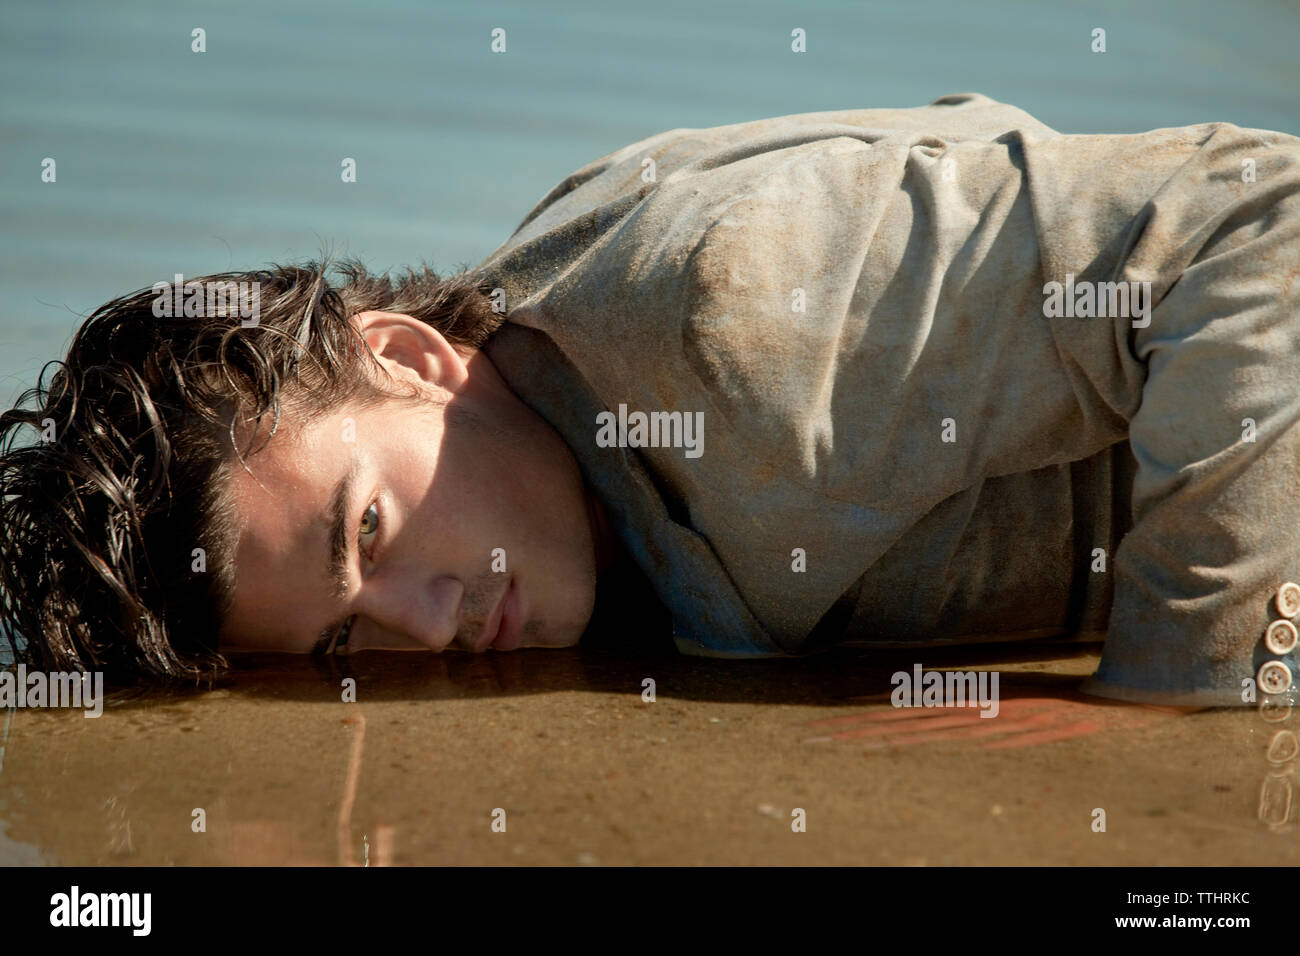 Man lying on shore at beach Banque D'Images